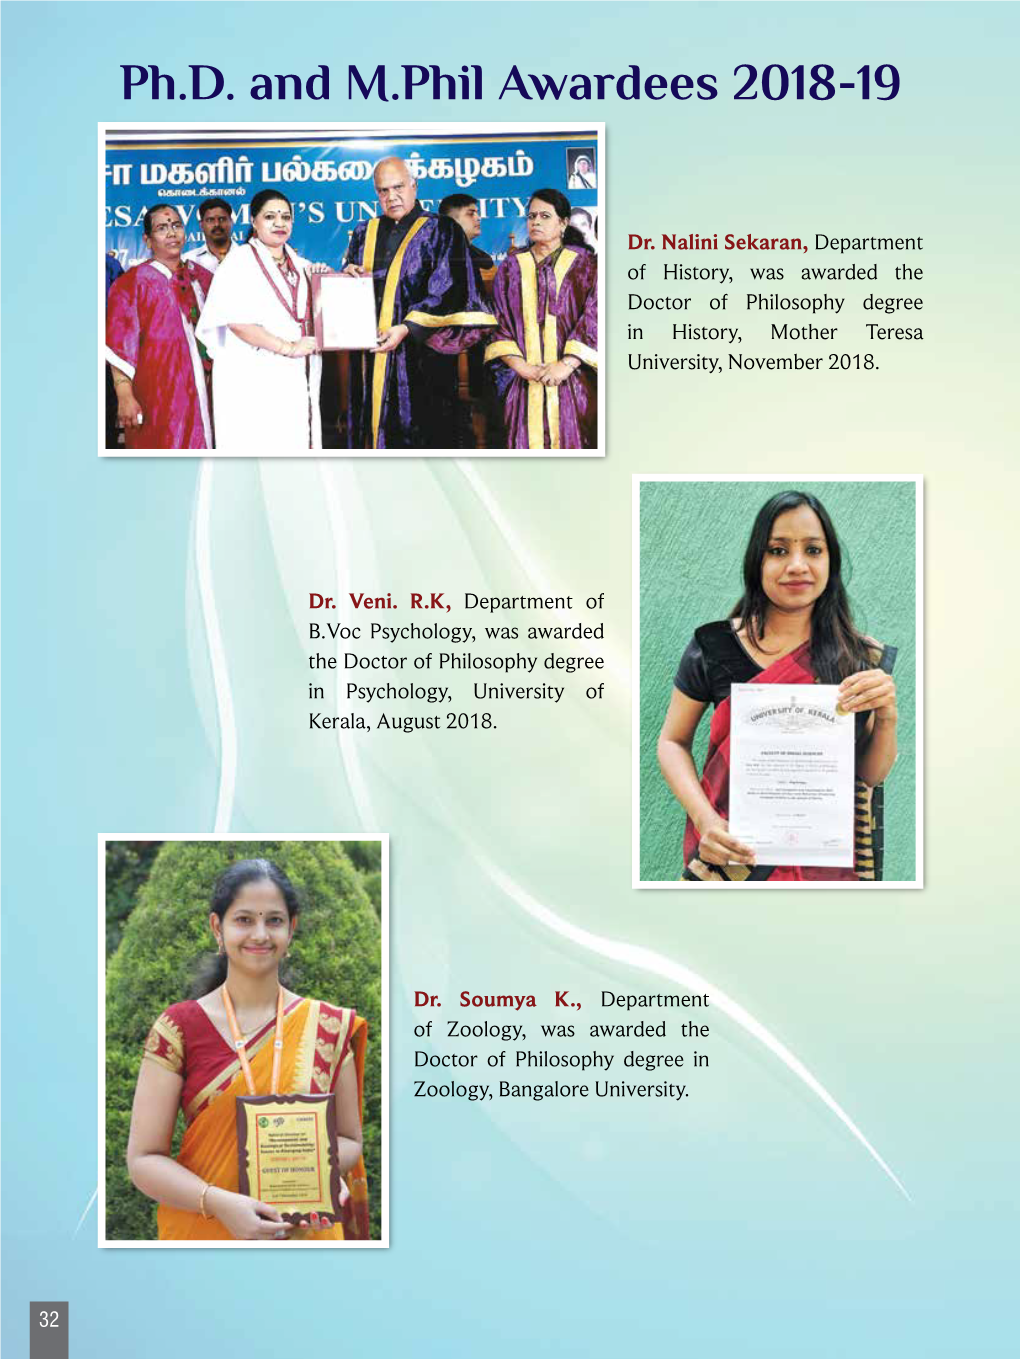 Ph.D. and M.Phil Awardees 2018-19